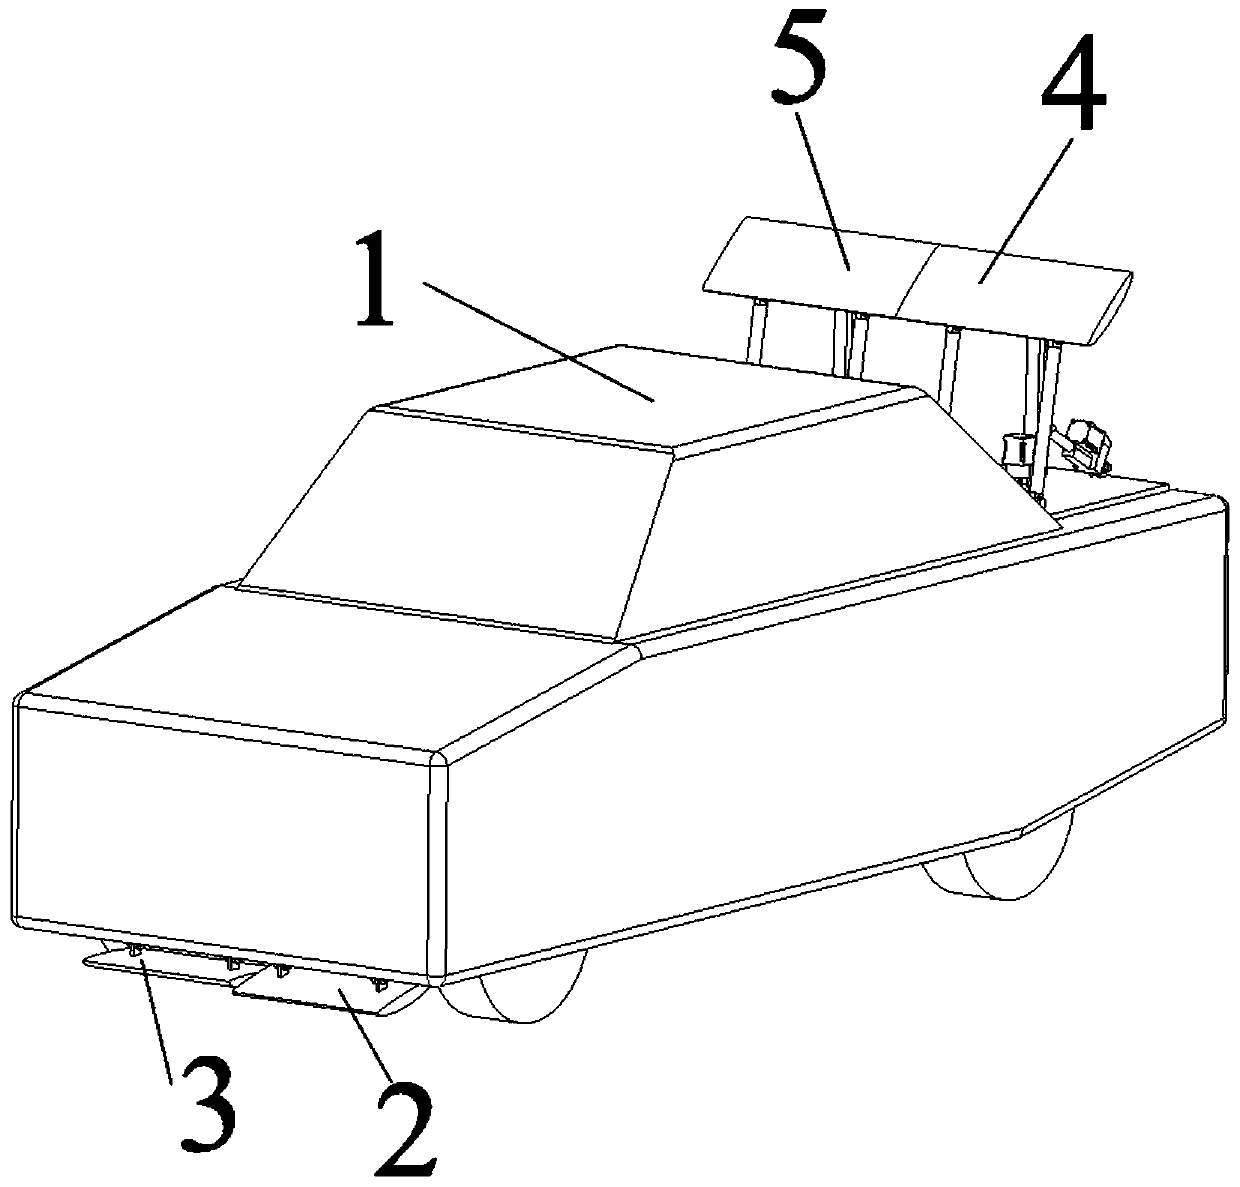 Device capable of adjusting vertical loads of four wheels of automobile